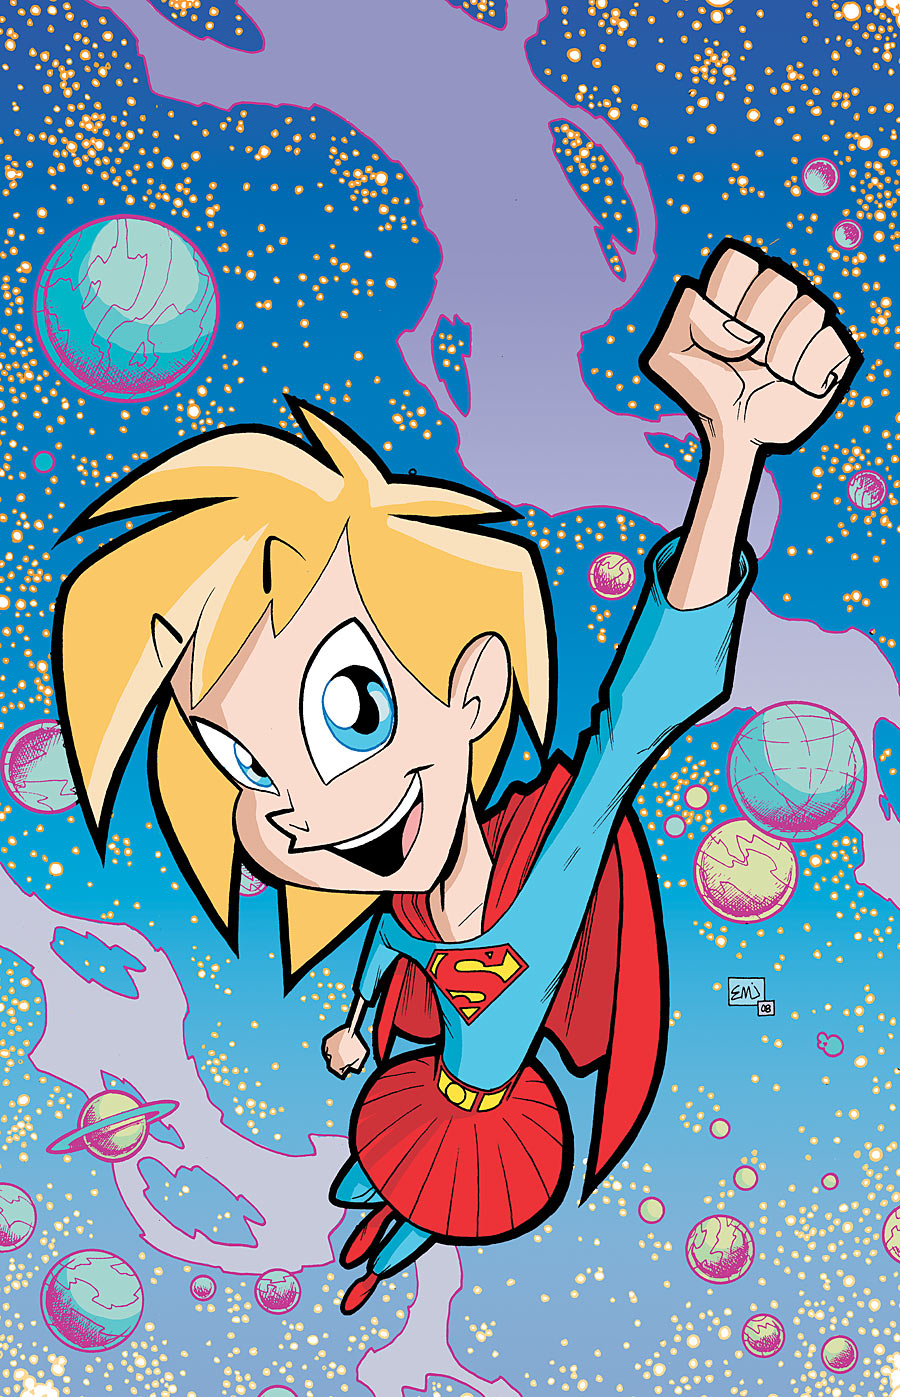 SUPERGIRL: COSMIC ADVENTURES IN THE EIGHTH GRADE #1